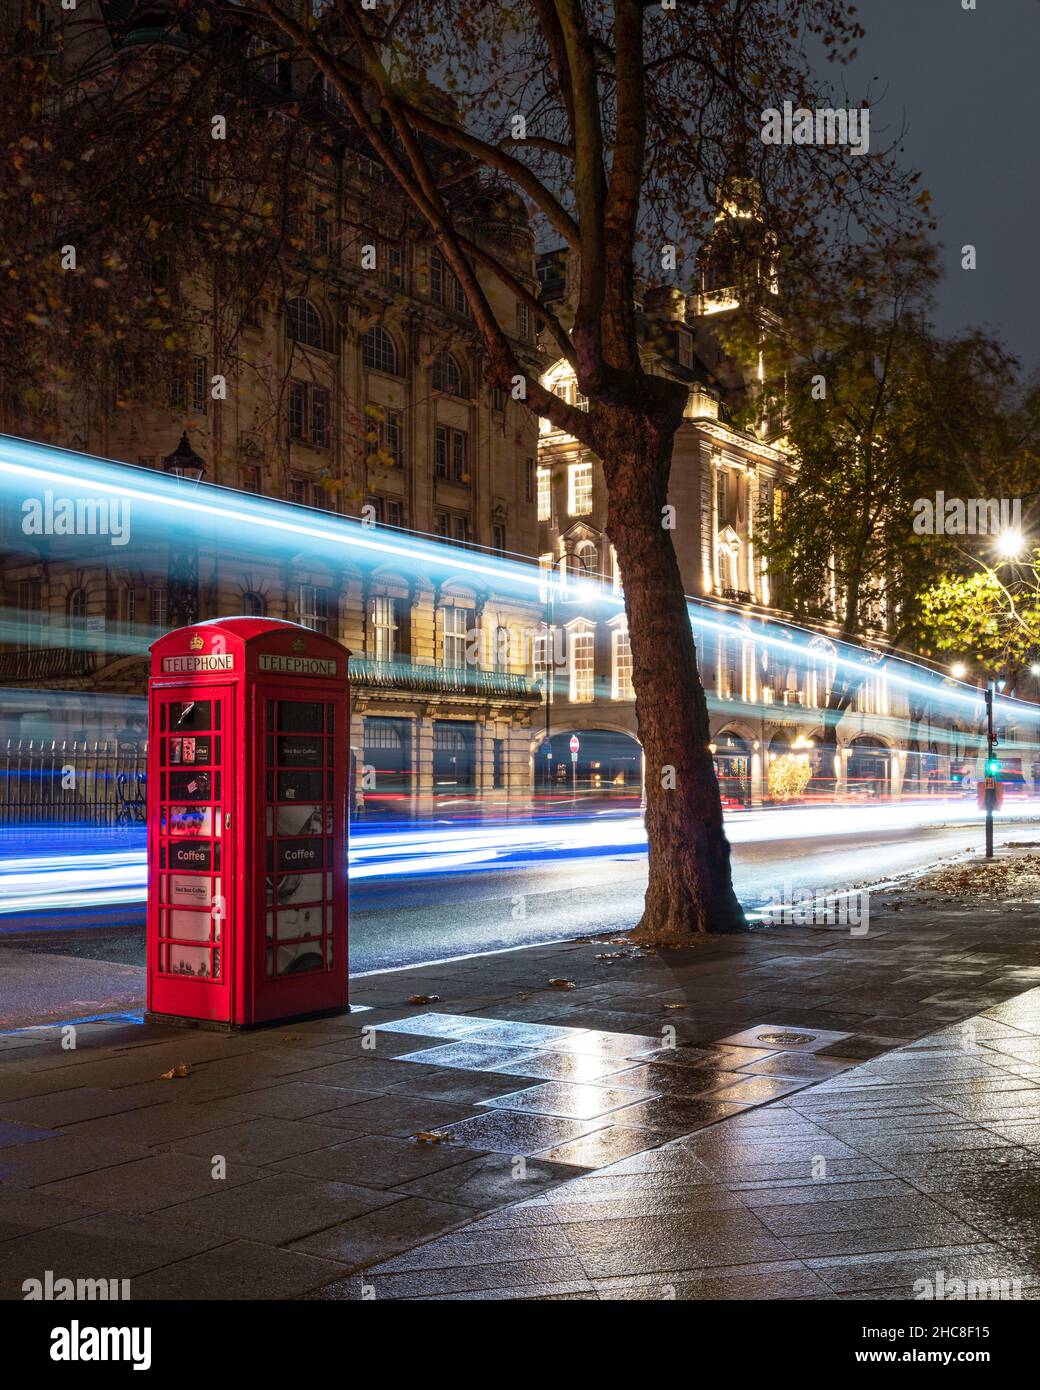 Red phone booth with bus trails in London street Stock Photo